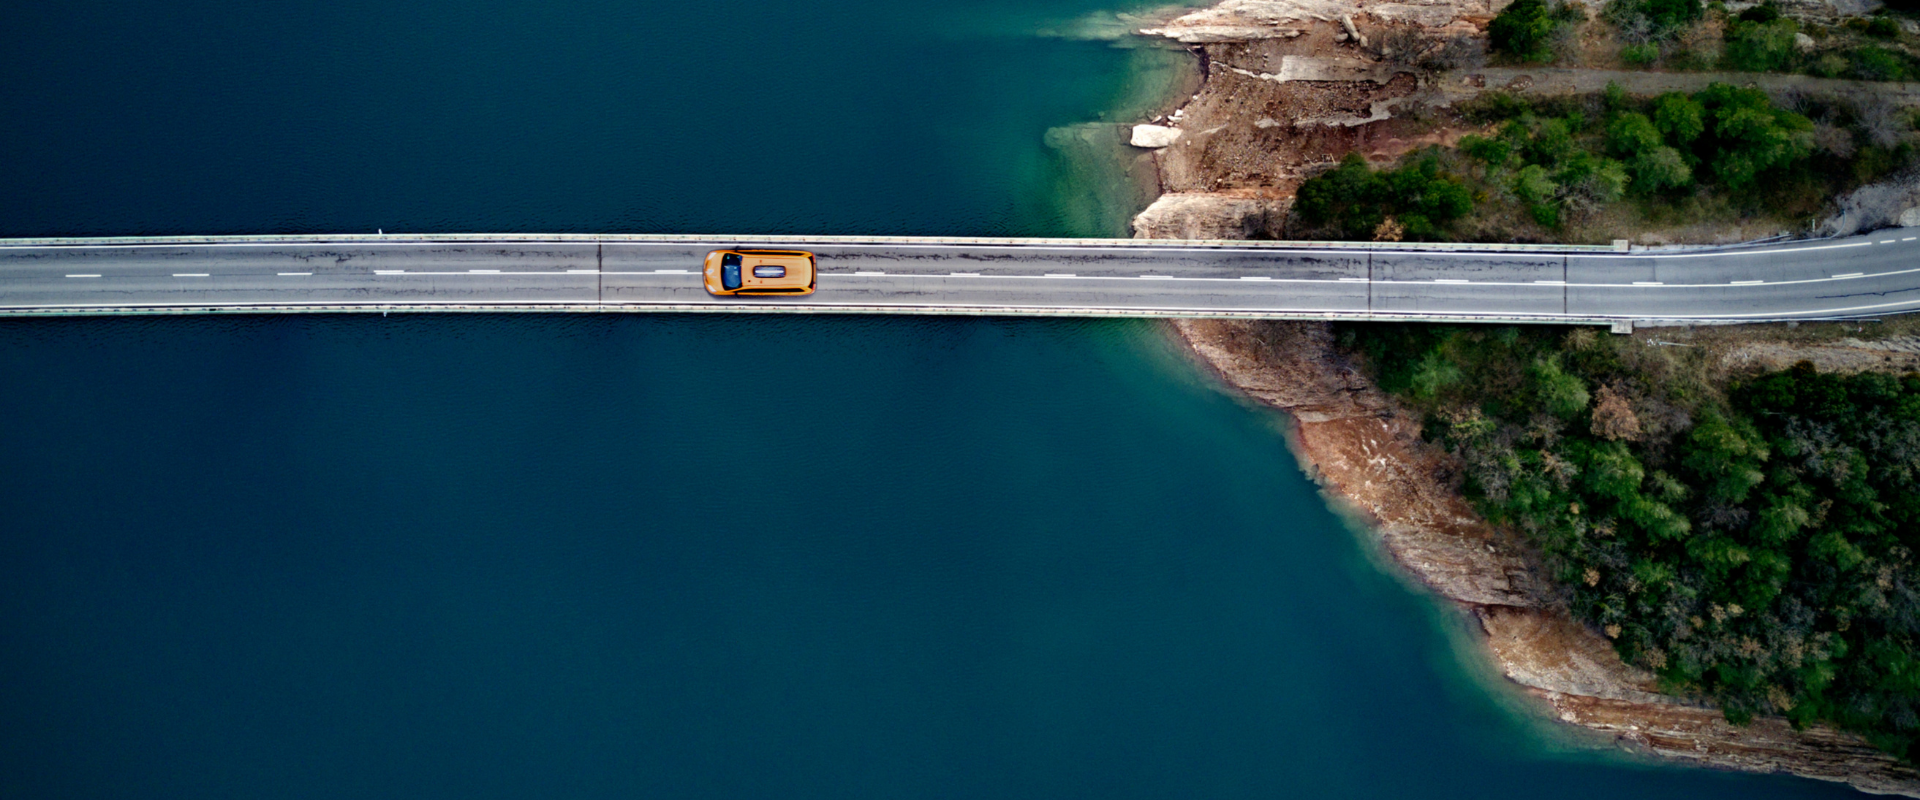 Car crossing a bridge over the water 